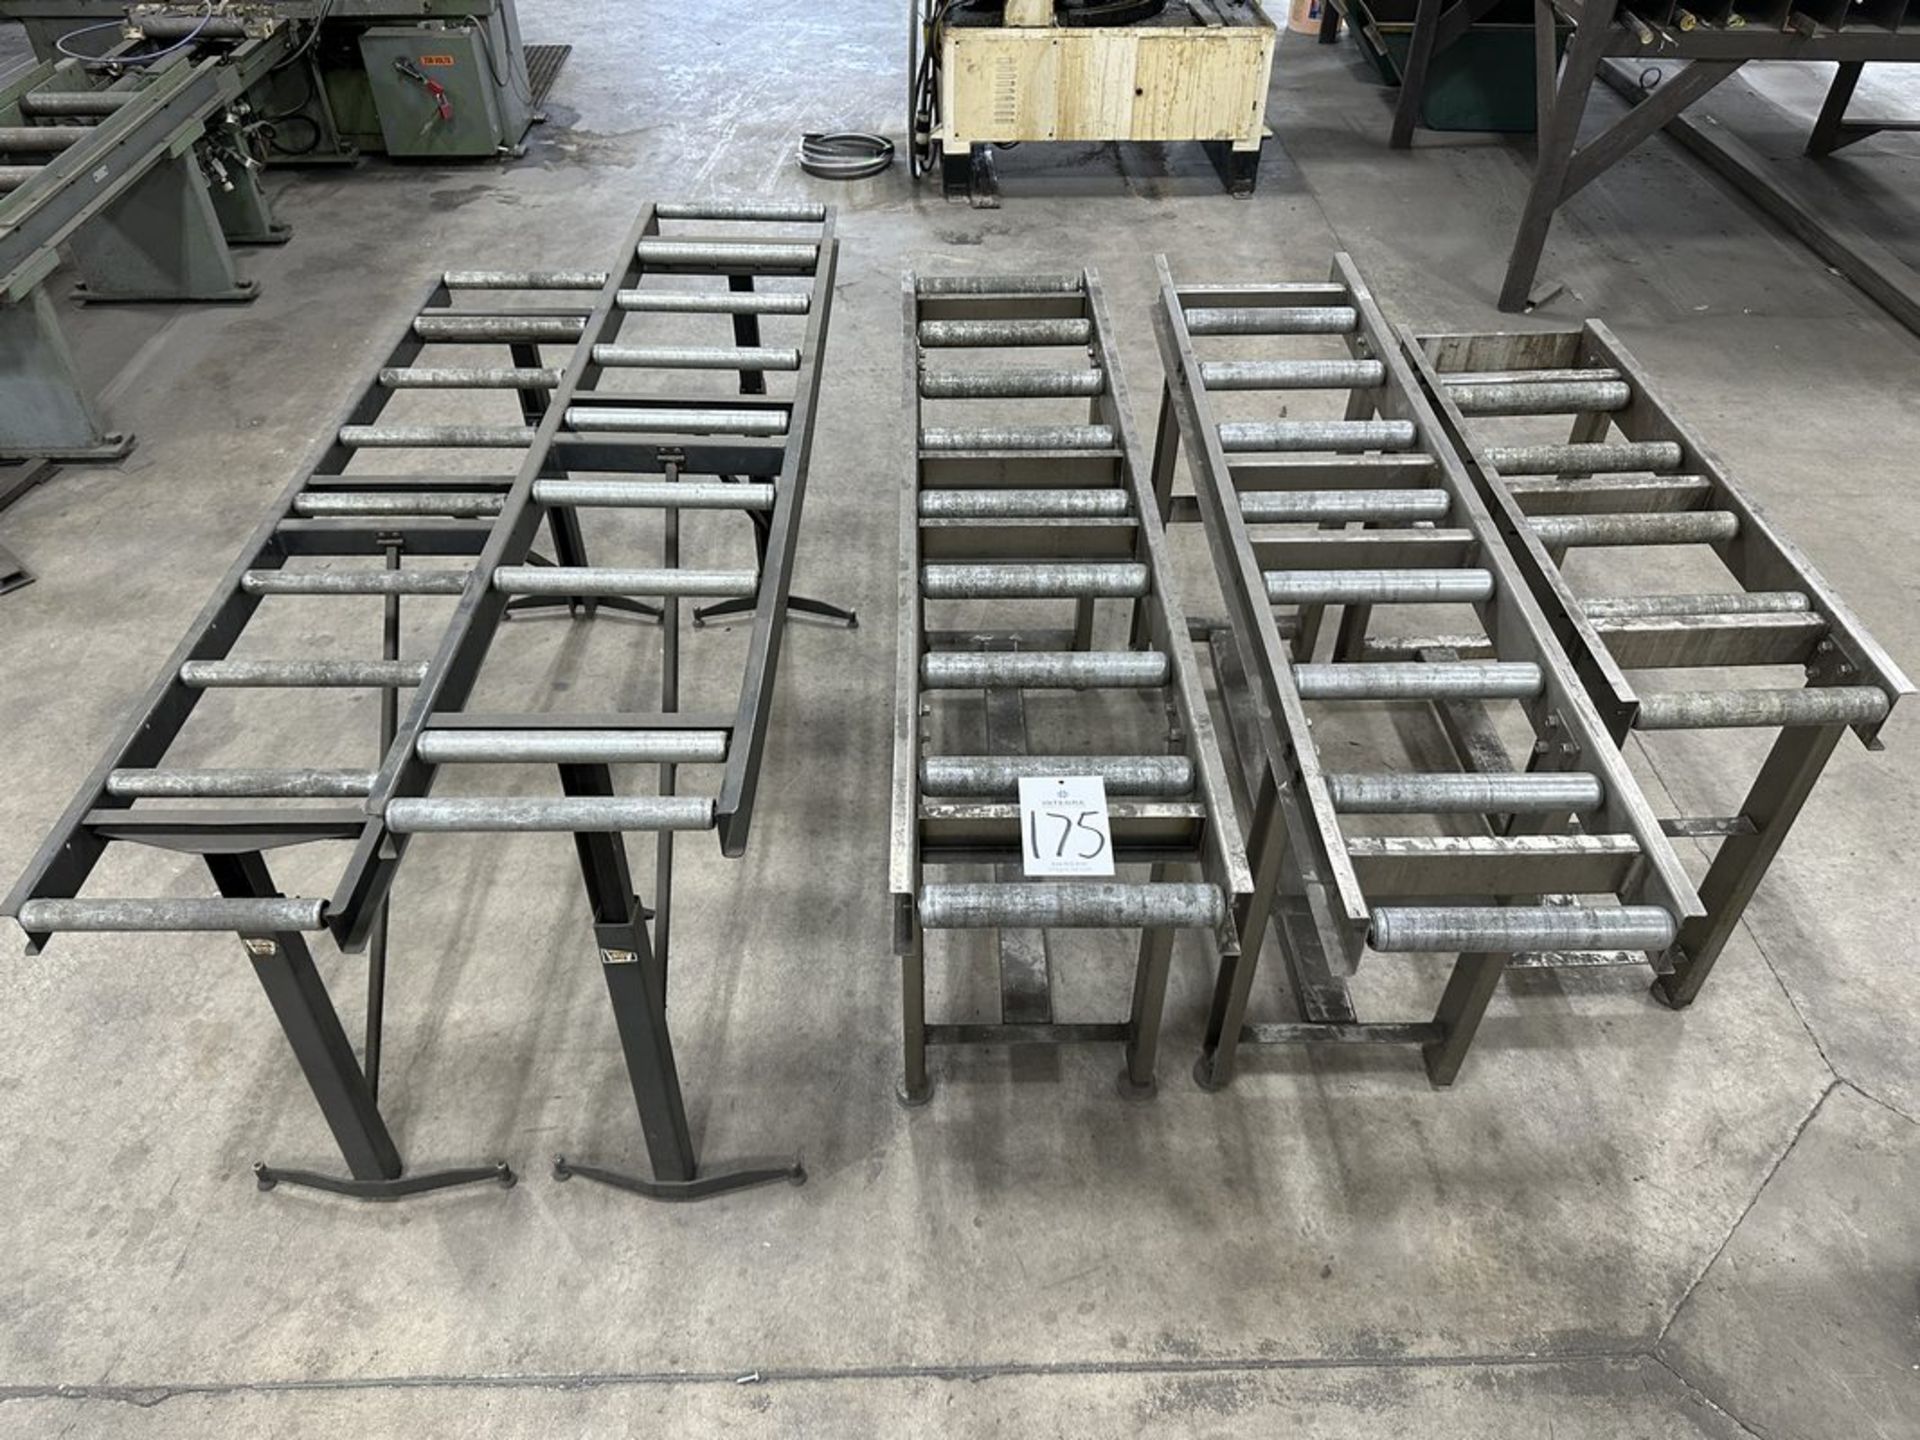 Lot of (5) Assorted Roller Conveyors Ranging from 13" x 42" - 13" x 66"